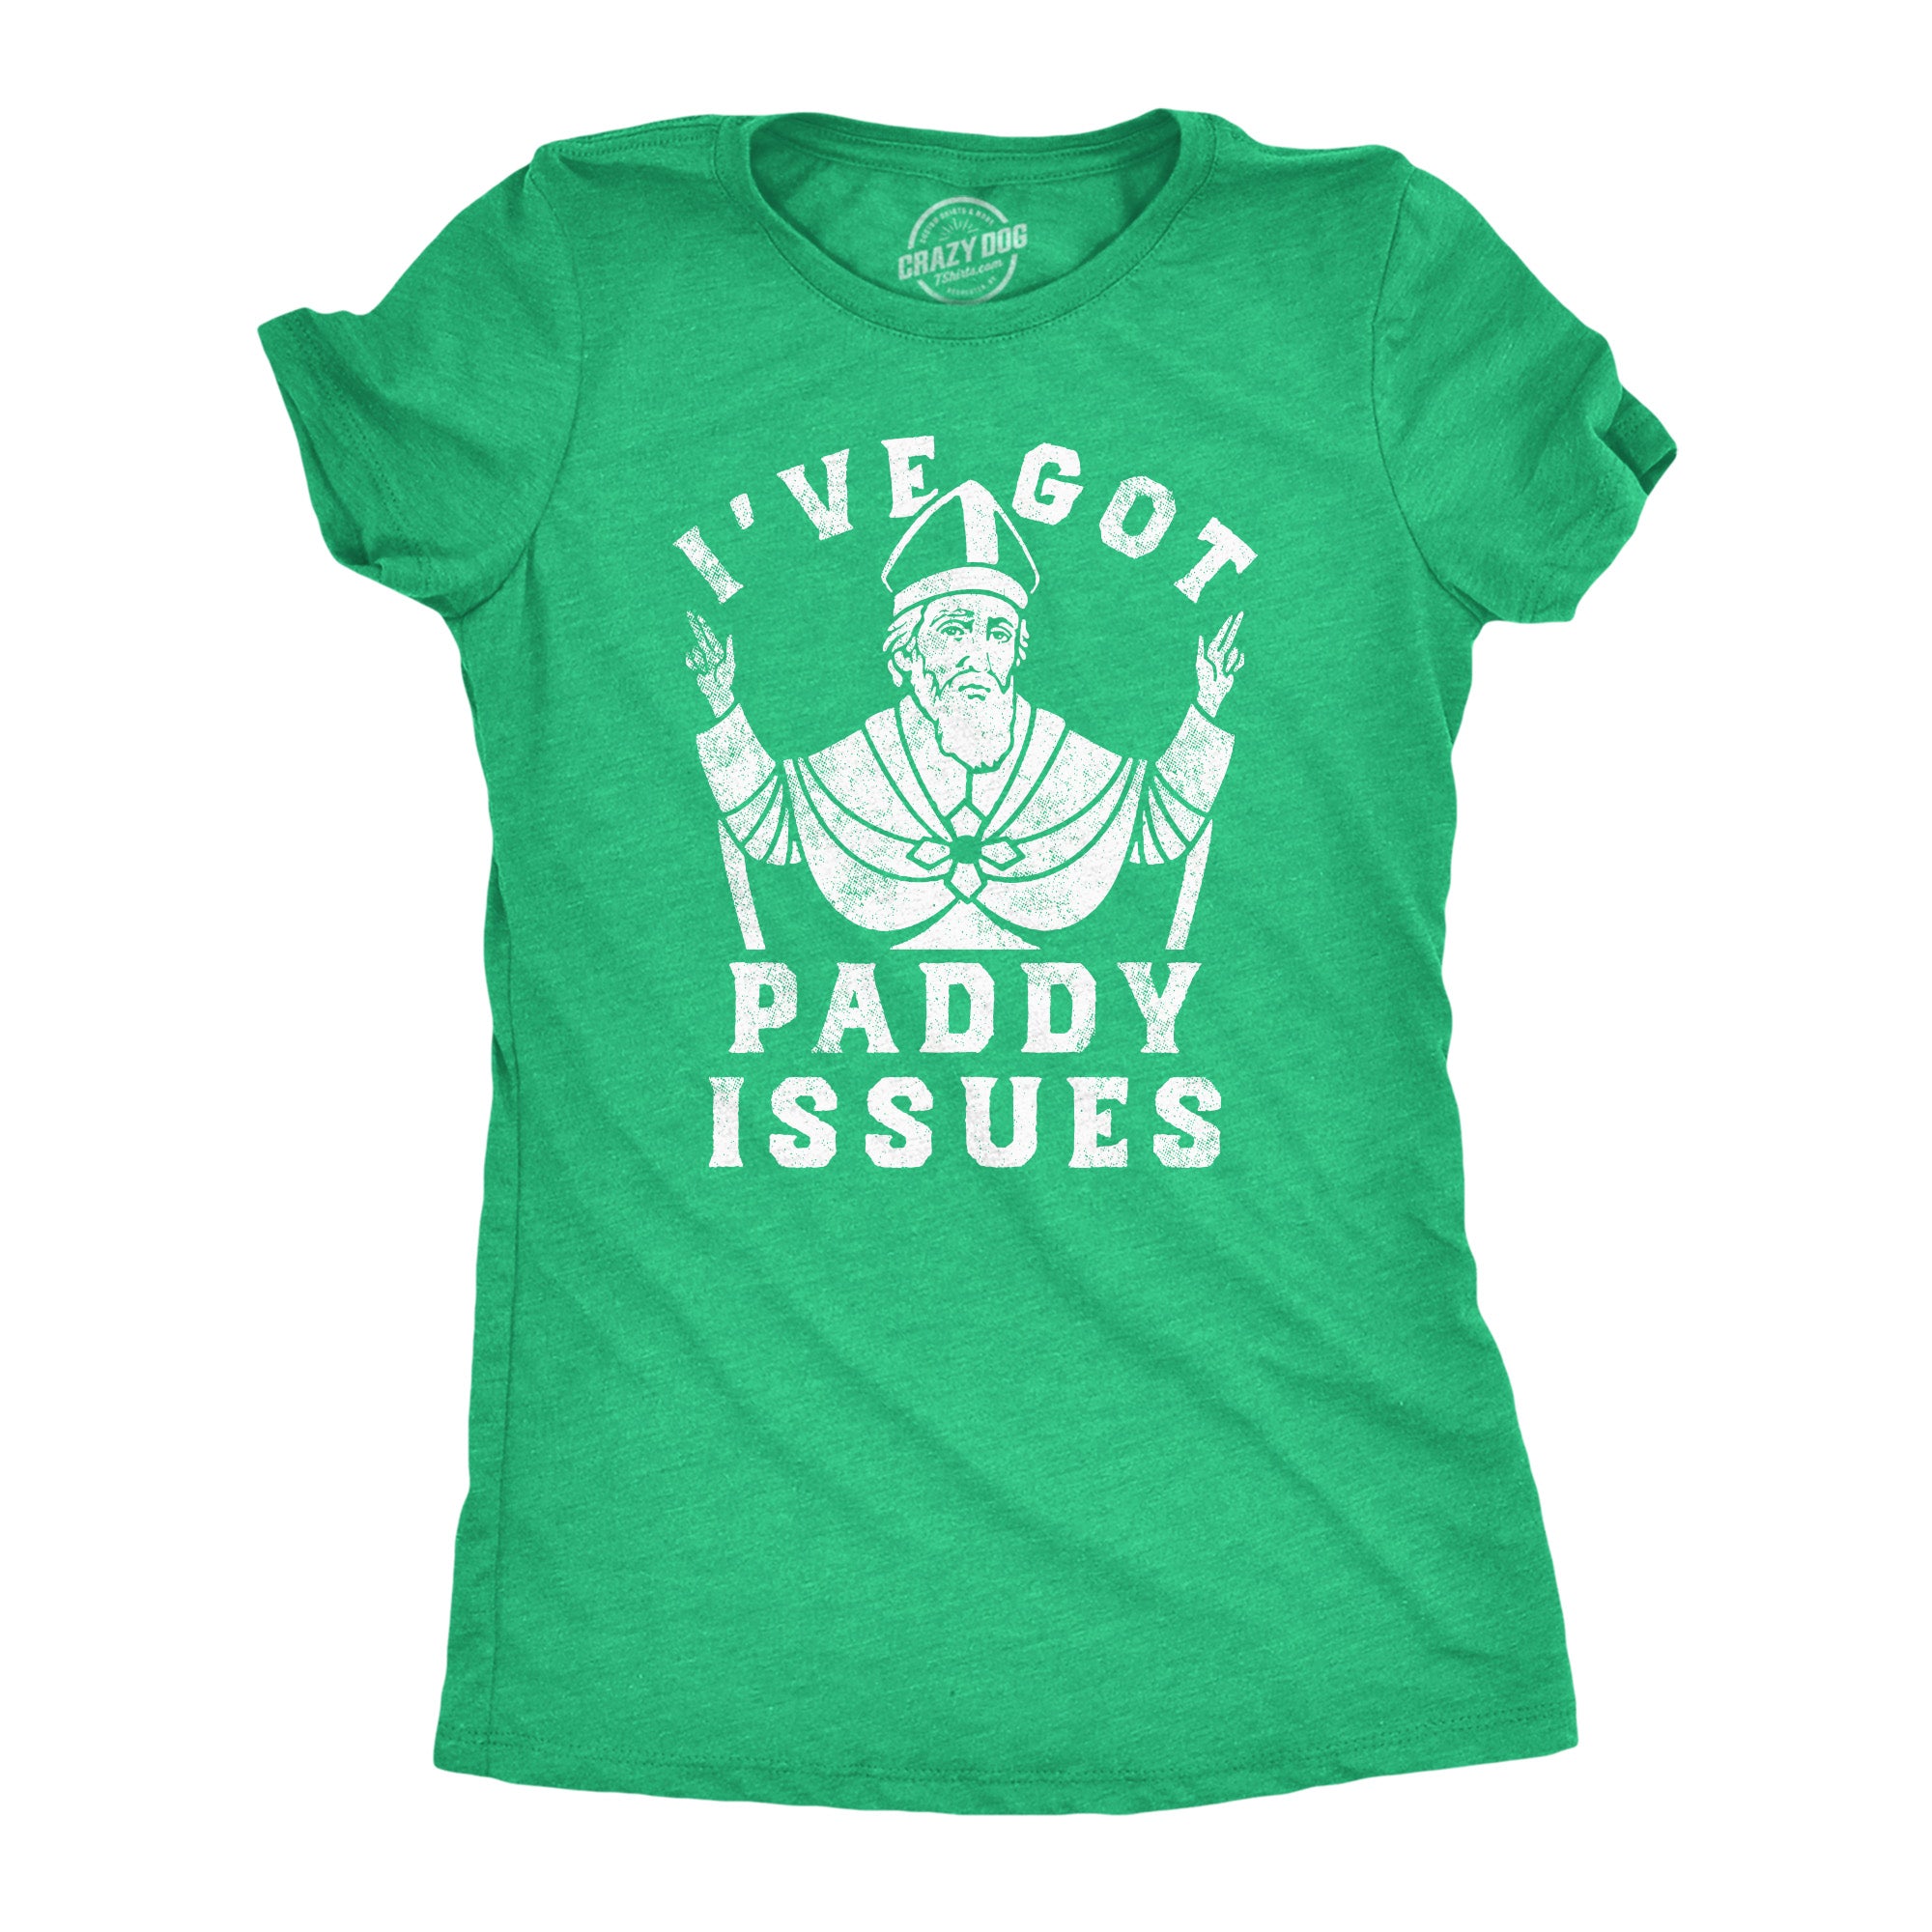 Funny Heather Green - Paddy Issues Ive Got Paddy Issues Womens T Shirt Nerdy Saint Patrick's Day Sarcastic Tee